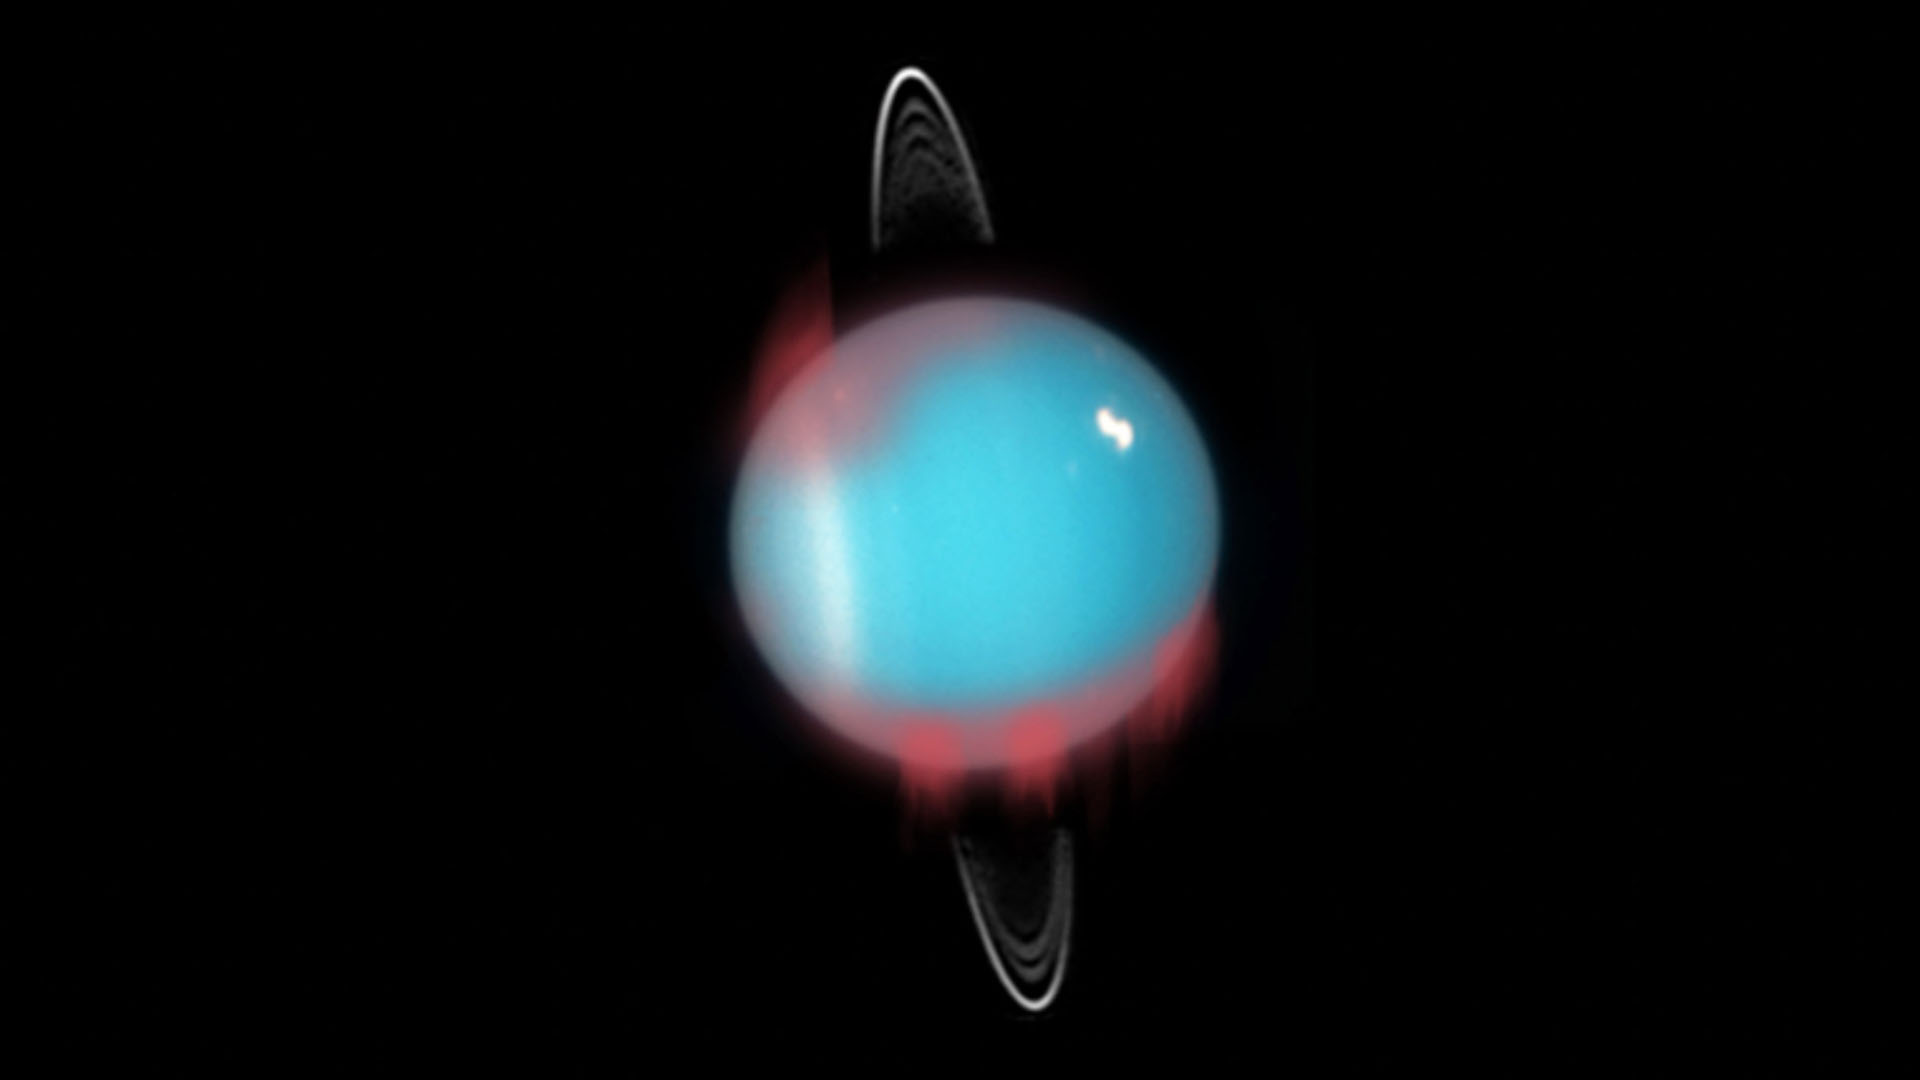 An artist's impression of the newfound infrared aurora superimposed on a Hubble Space Telescope photograph of Uranus.